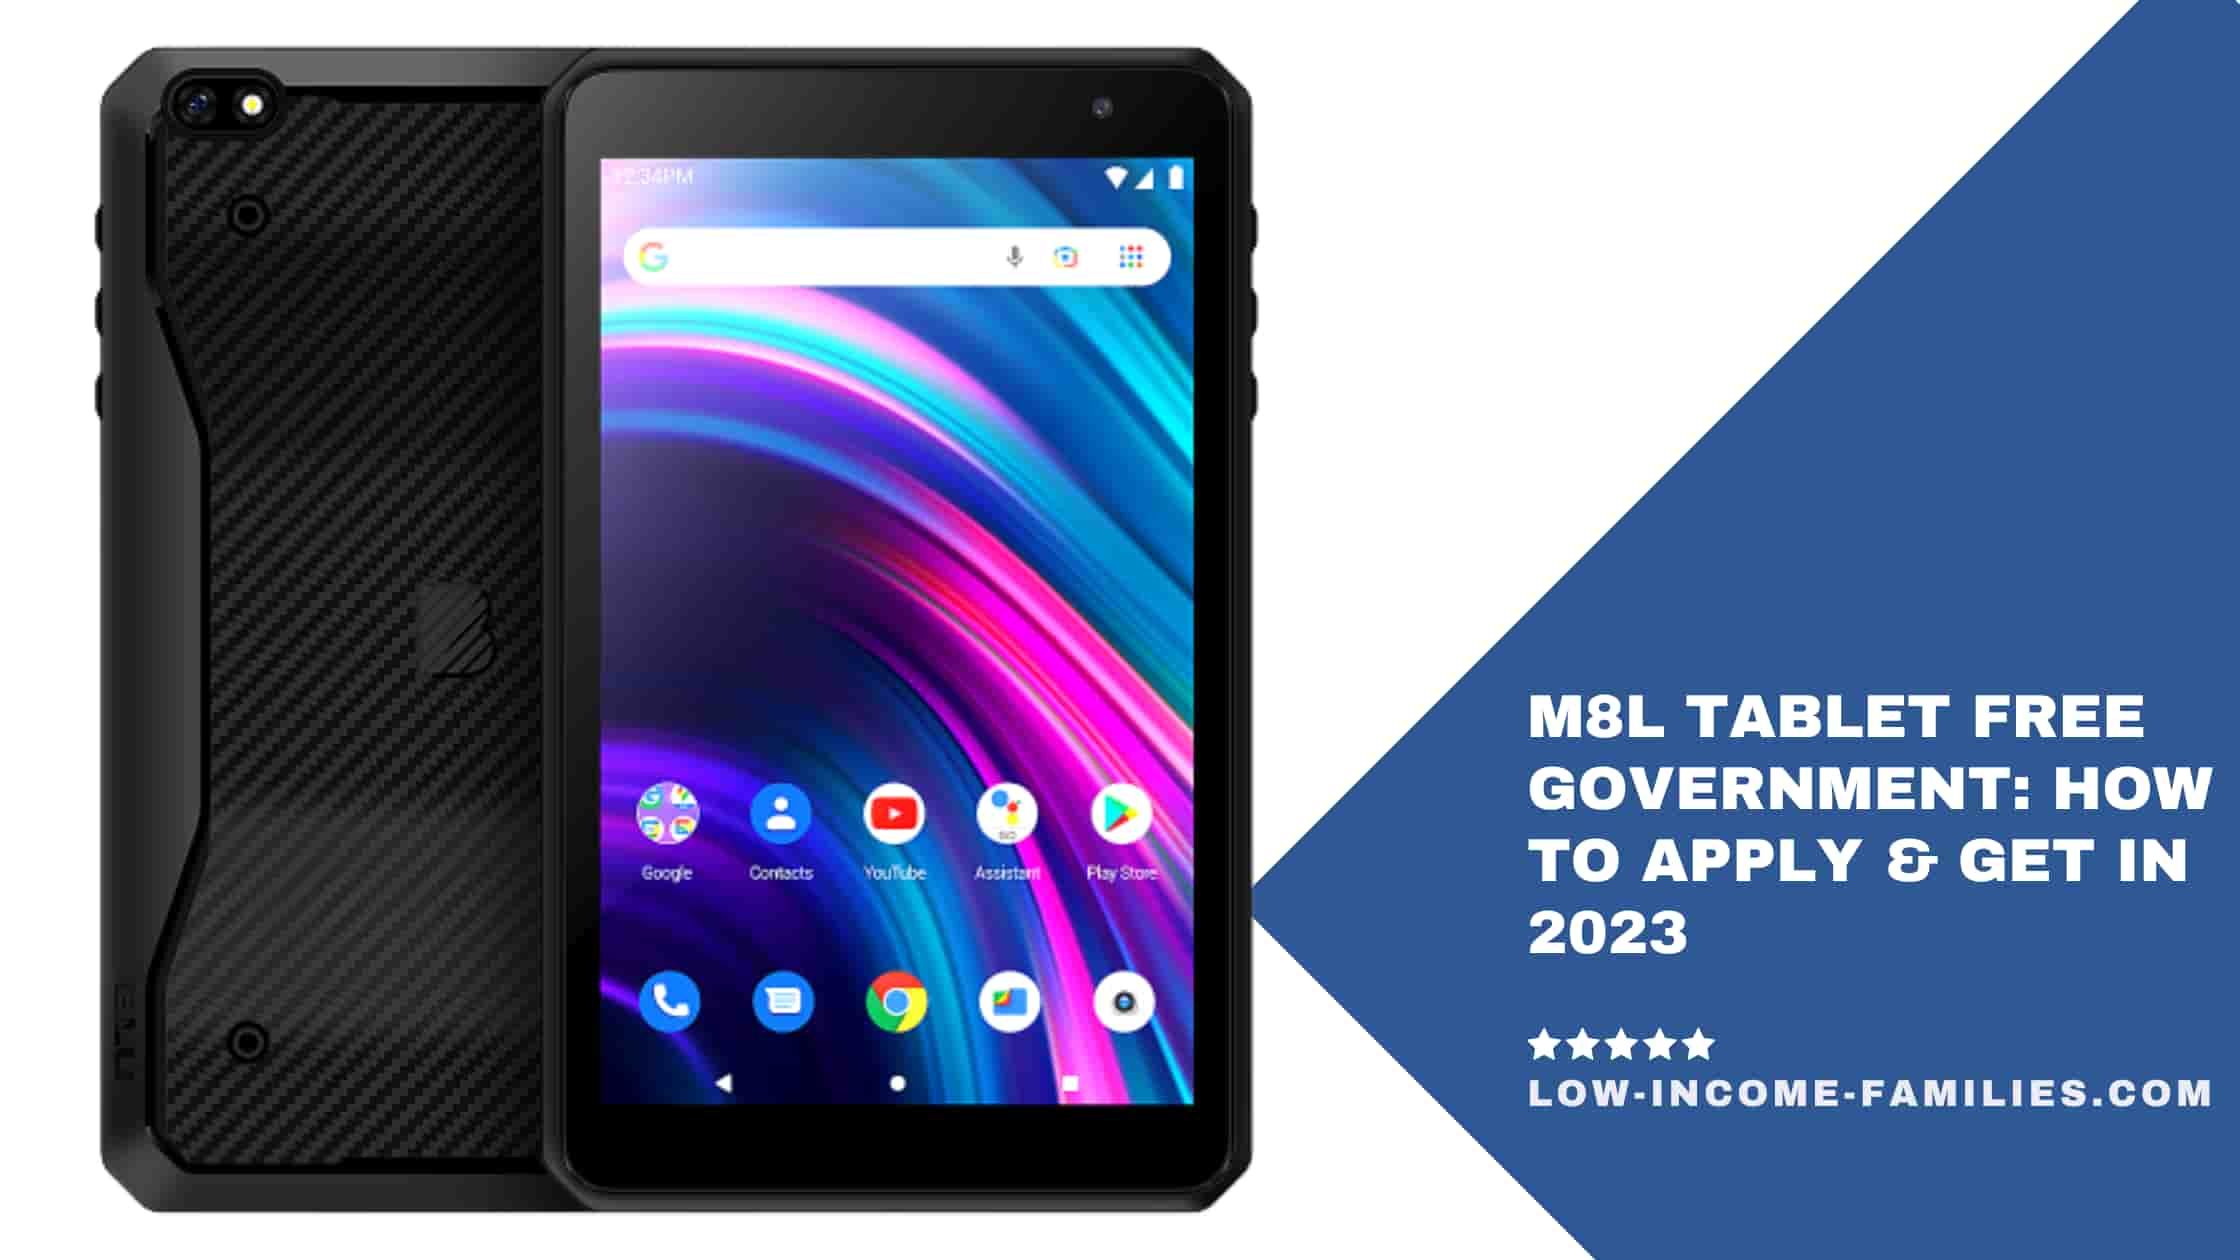 M8L Tablet Free Government: How to Apply & Get in 2024